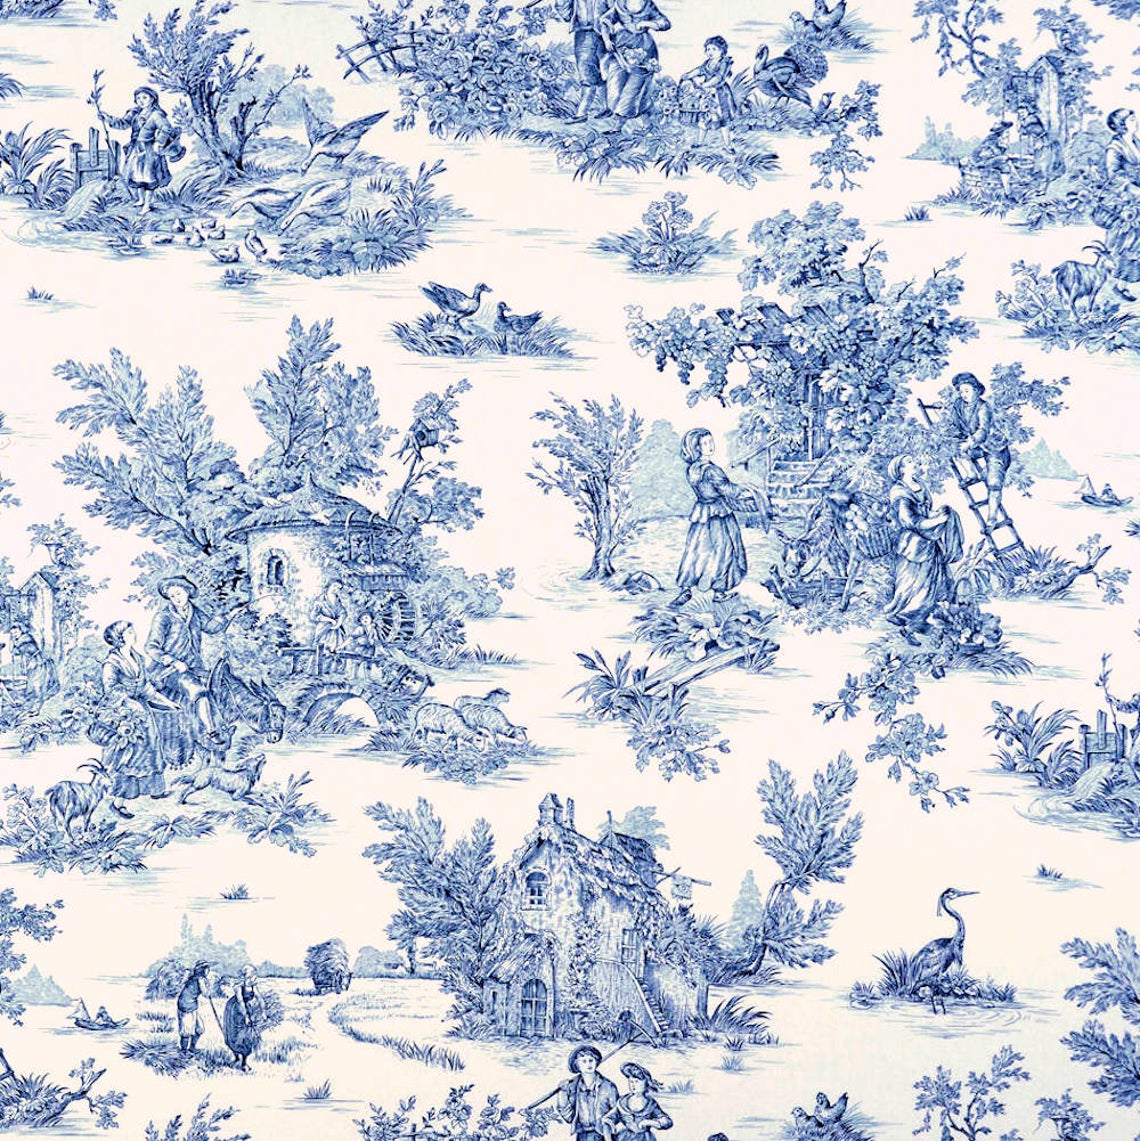 pinch pleated curtain panels pair in pastorale #2 blue on cream french country toile